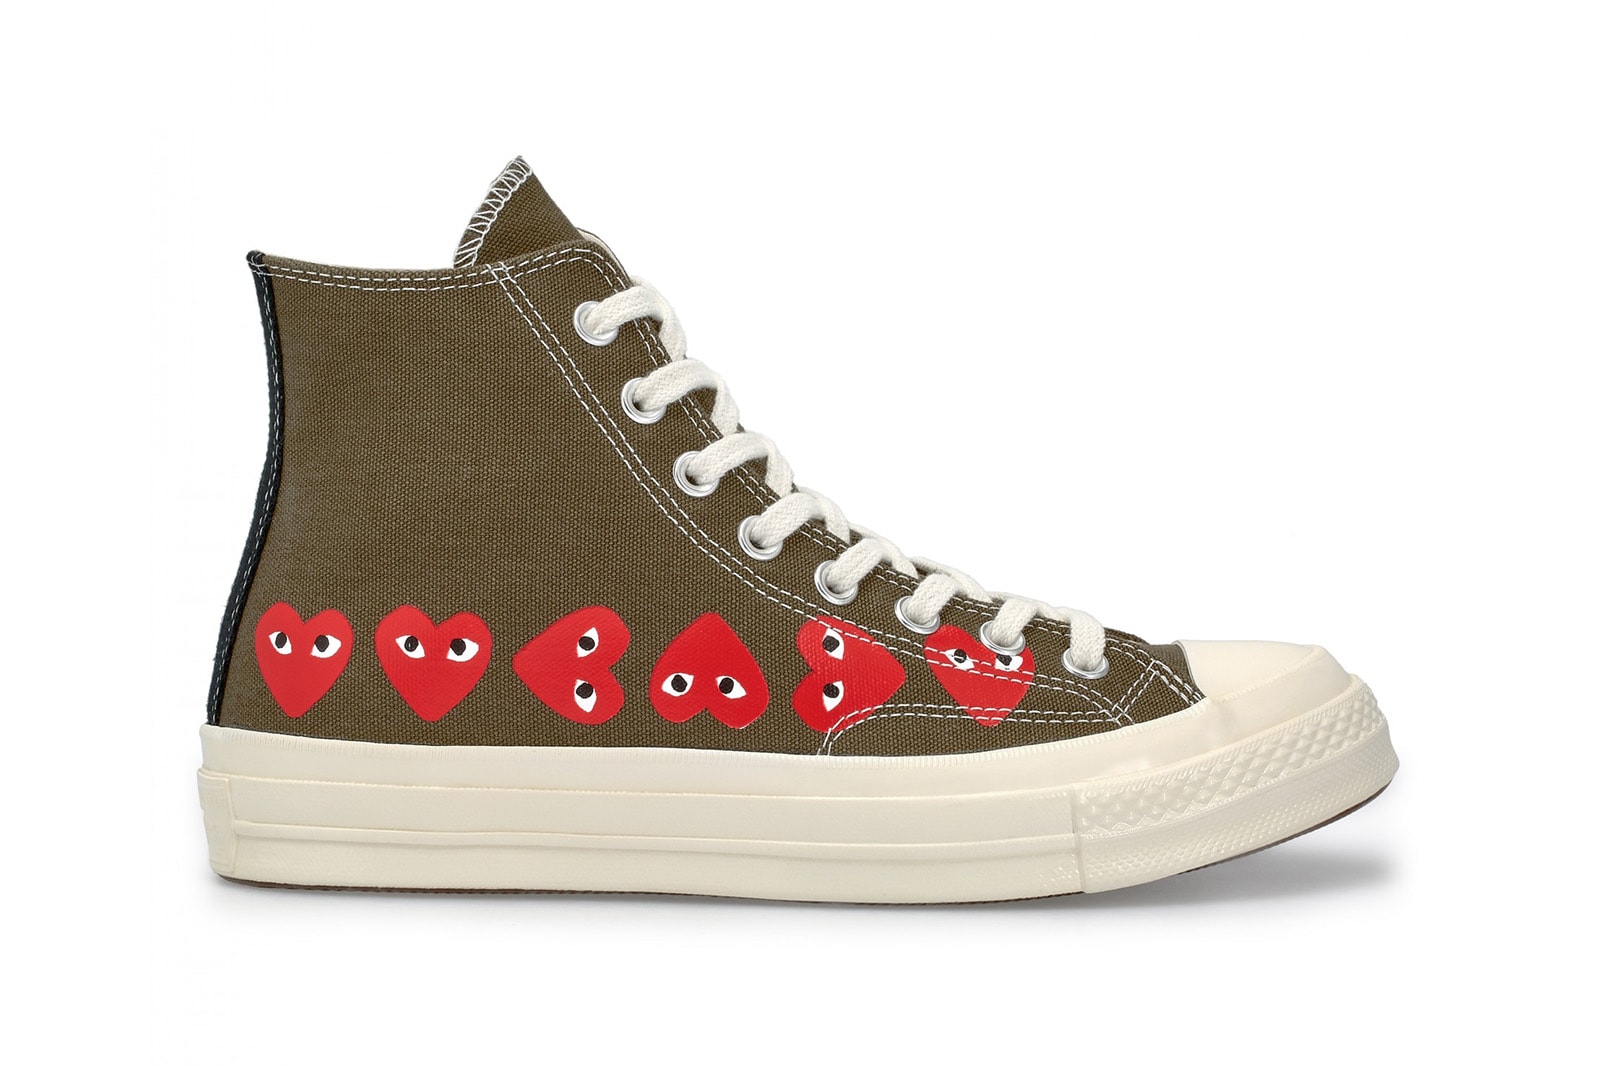 CdG PLAY x Converse Chuck Taylor All Star Date Hypebeast